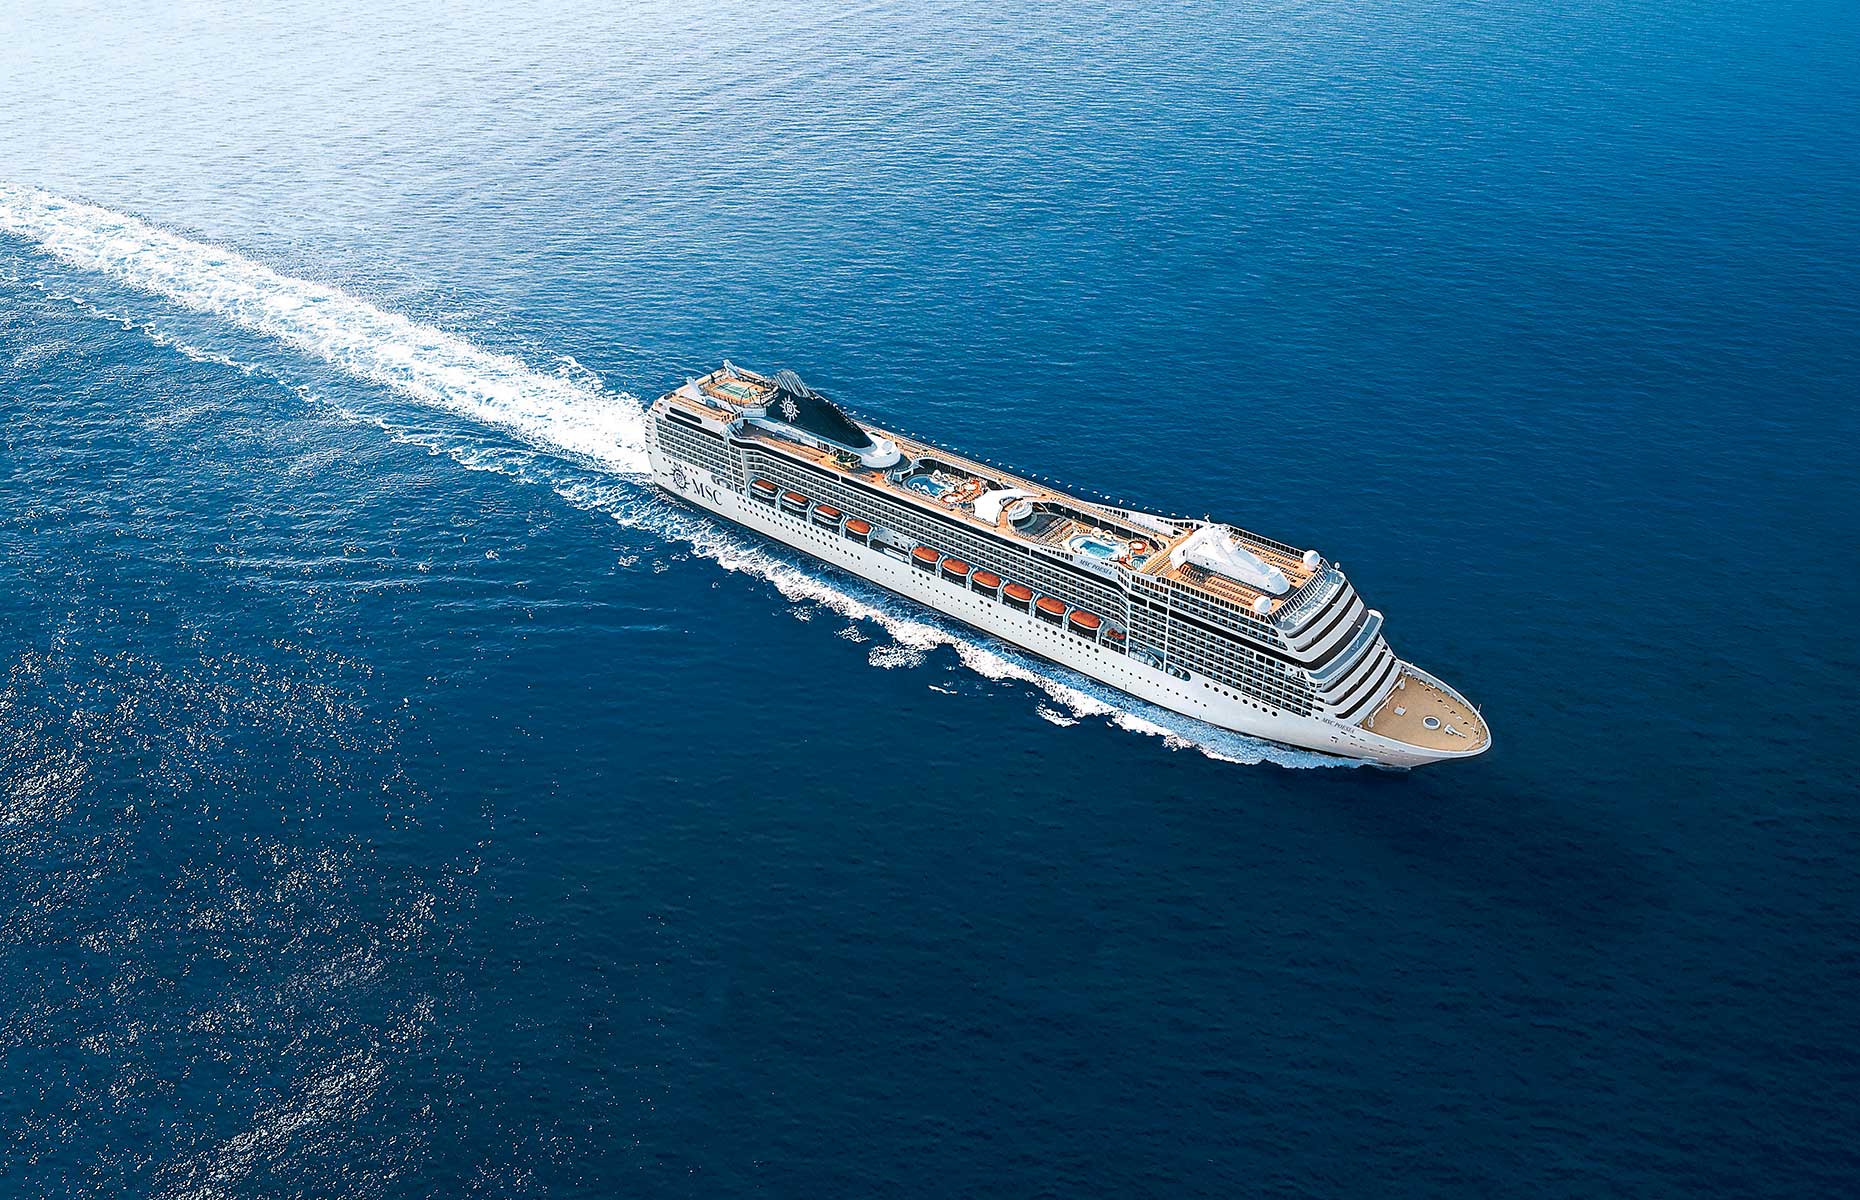 MSC Poesia viewed from the skies (Image: Courtesy of MSC Cruises)